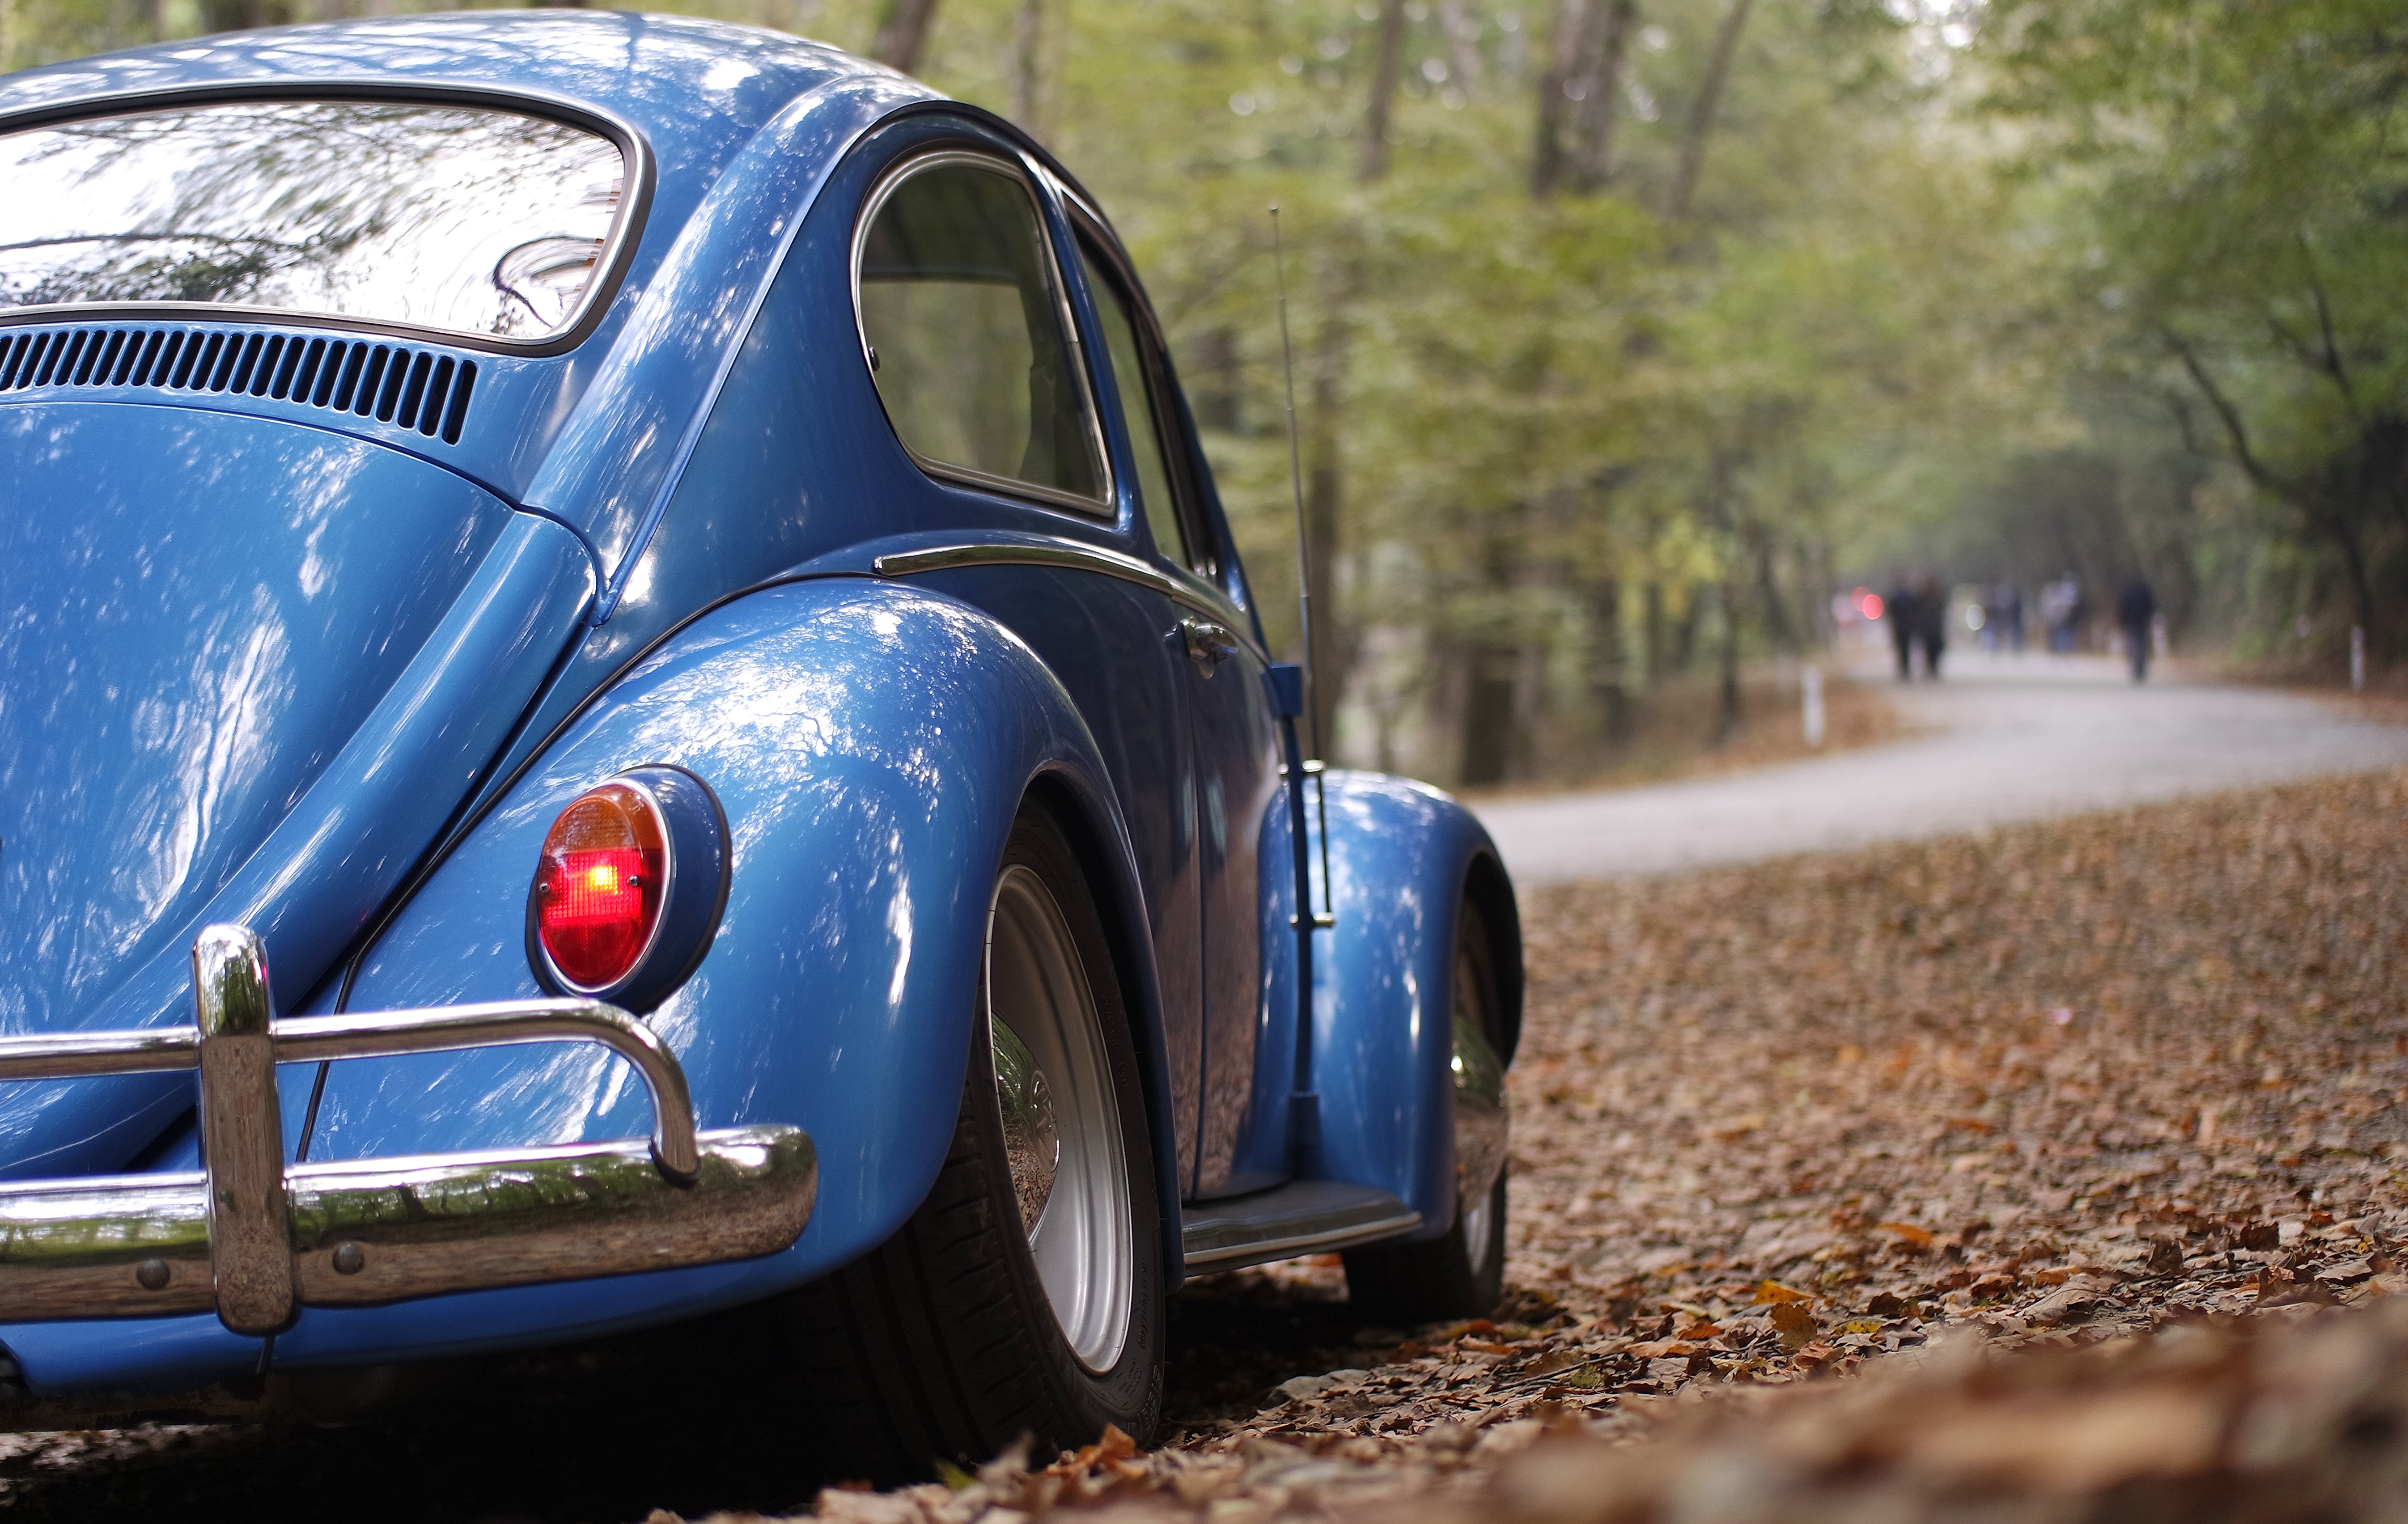 Blue volkswagen beetle vintage car surrounded by dry leaves during daytime photo